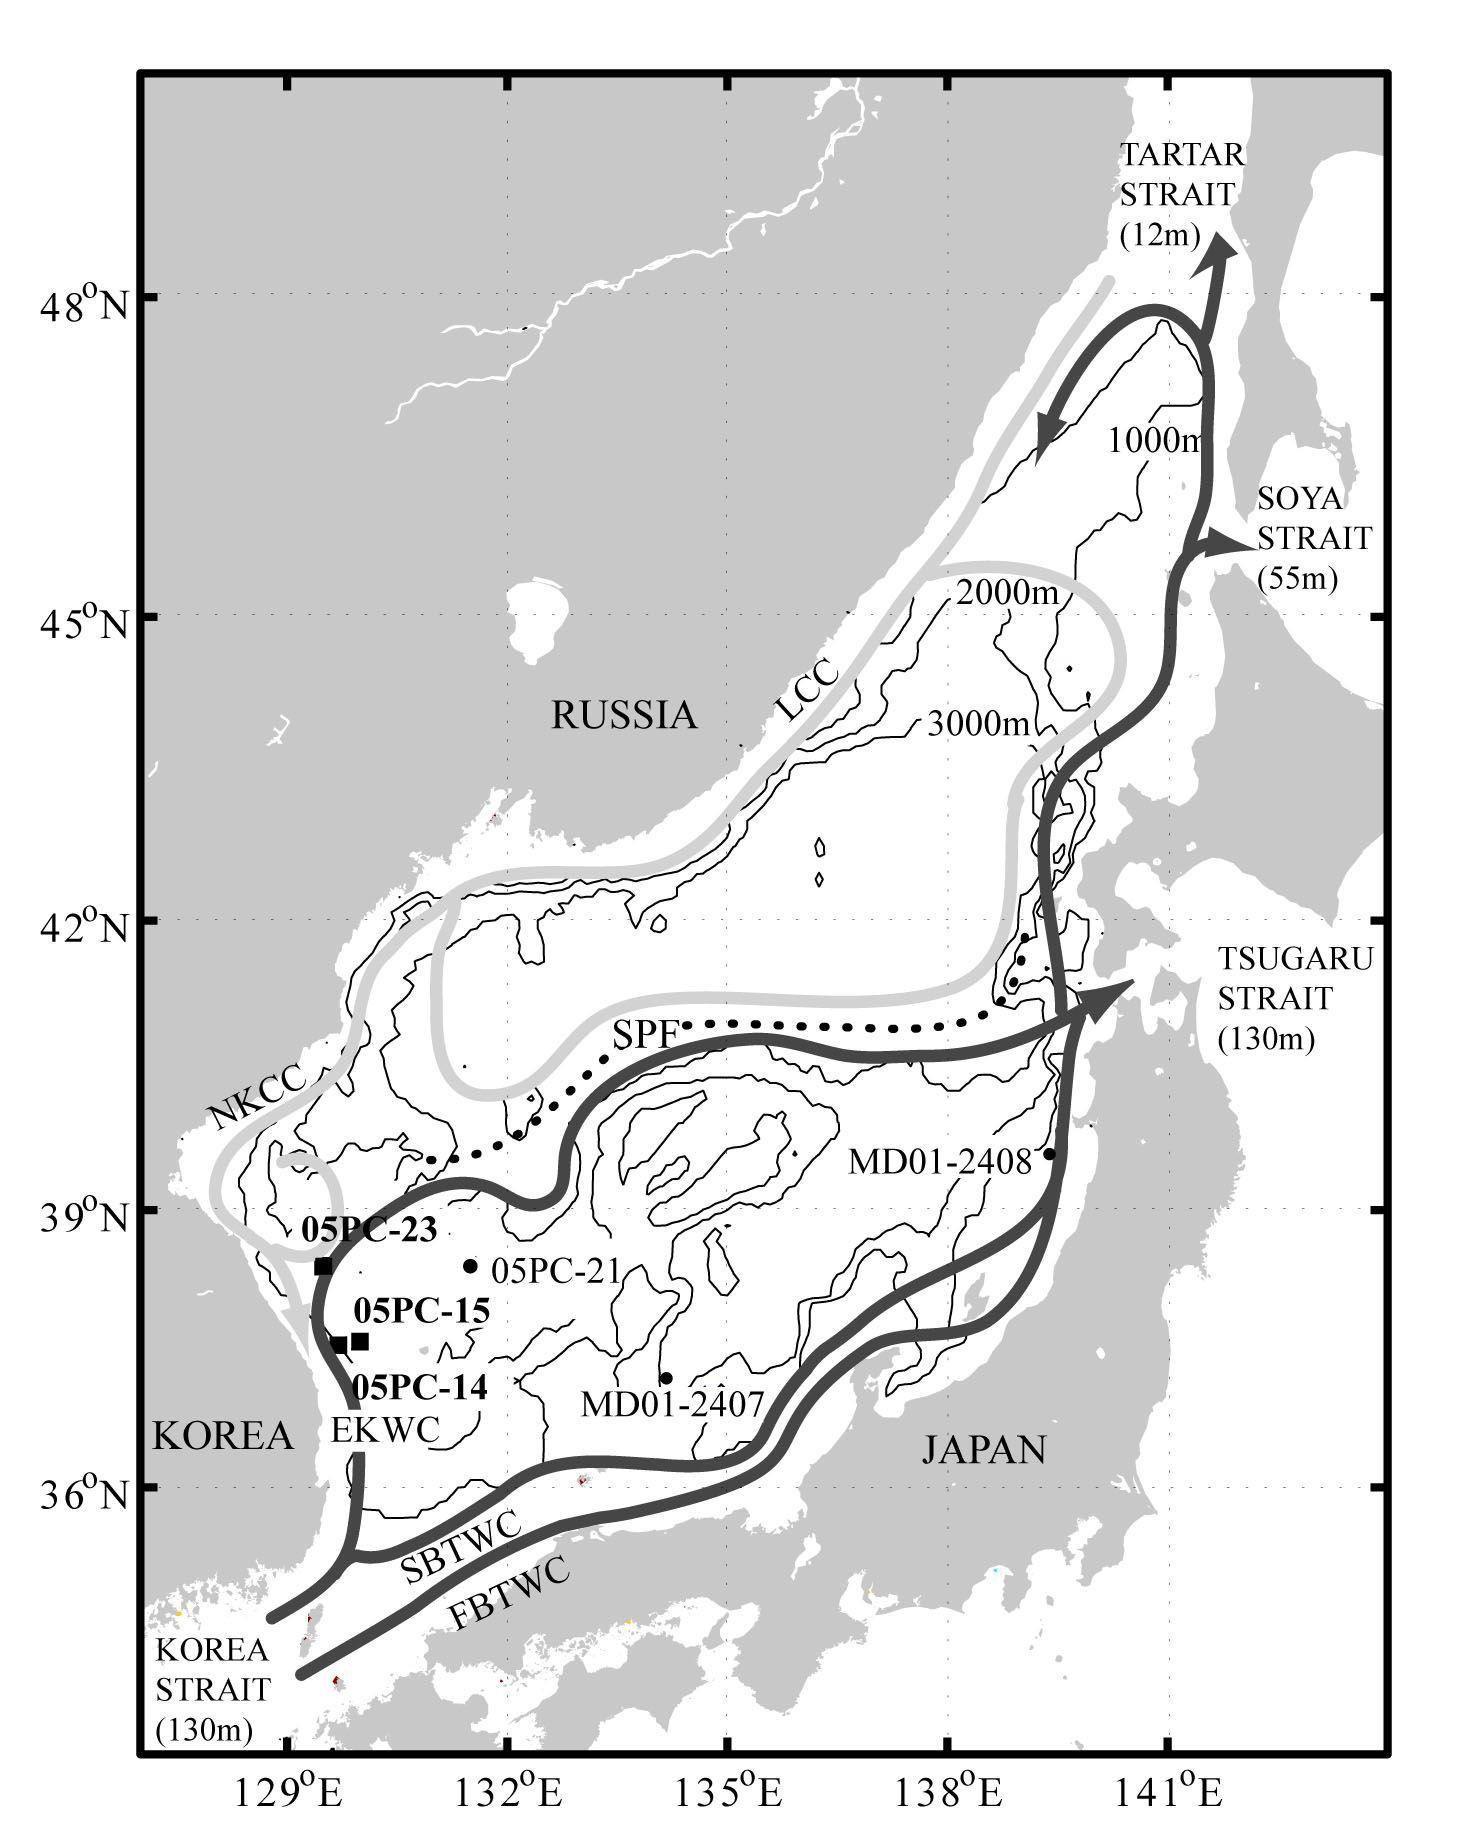 Core location. Two MD cores near the Japan were from Fujine et al., 2006, 2009.